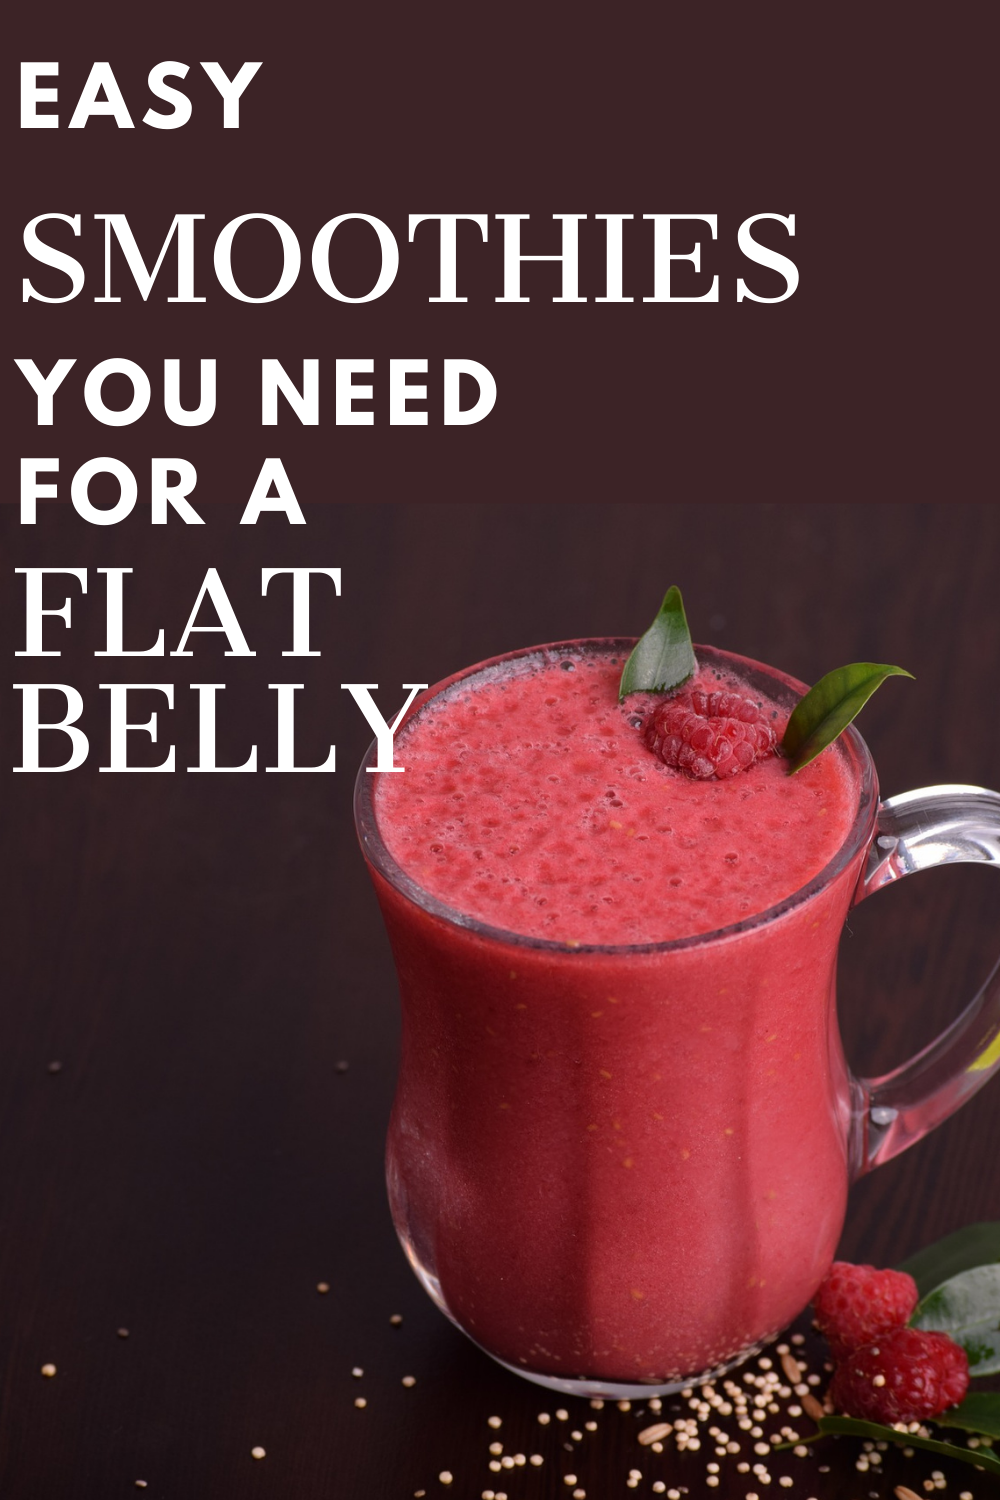 Pin on Weight loss smoothies for flat belly